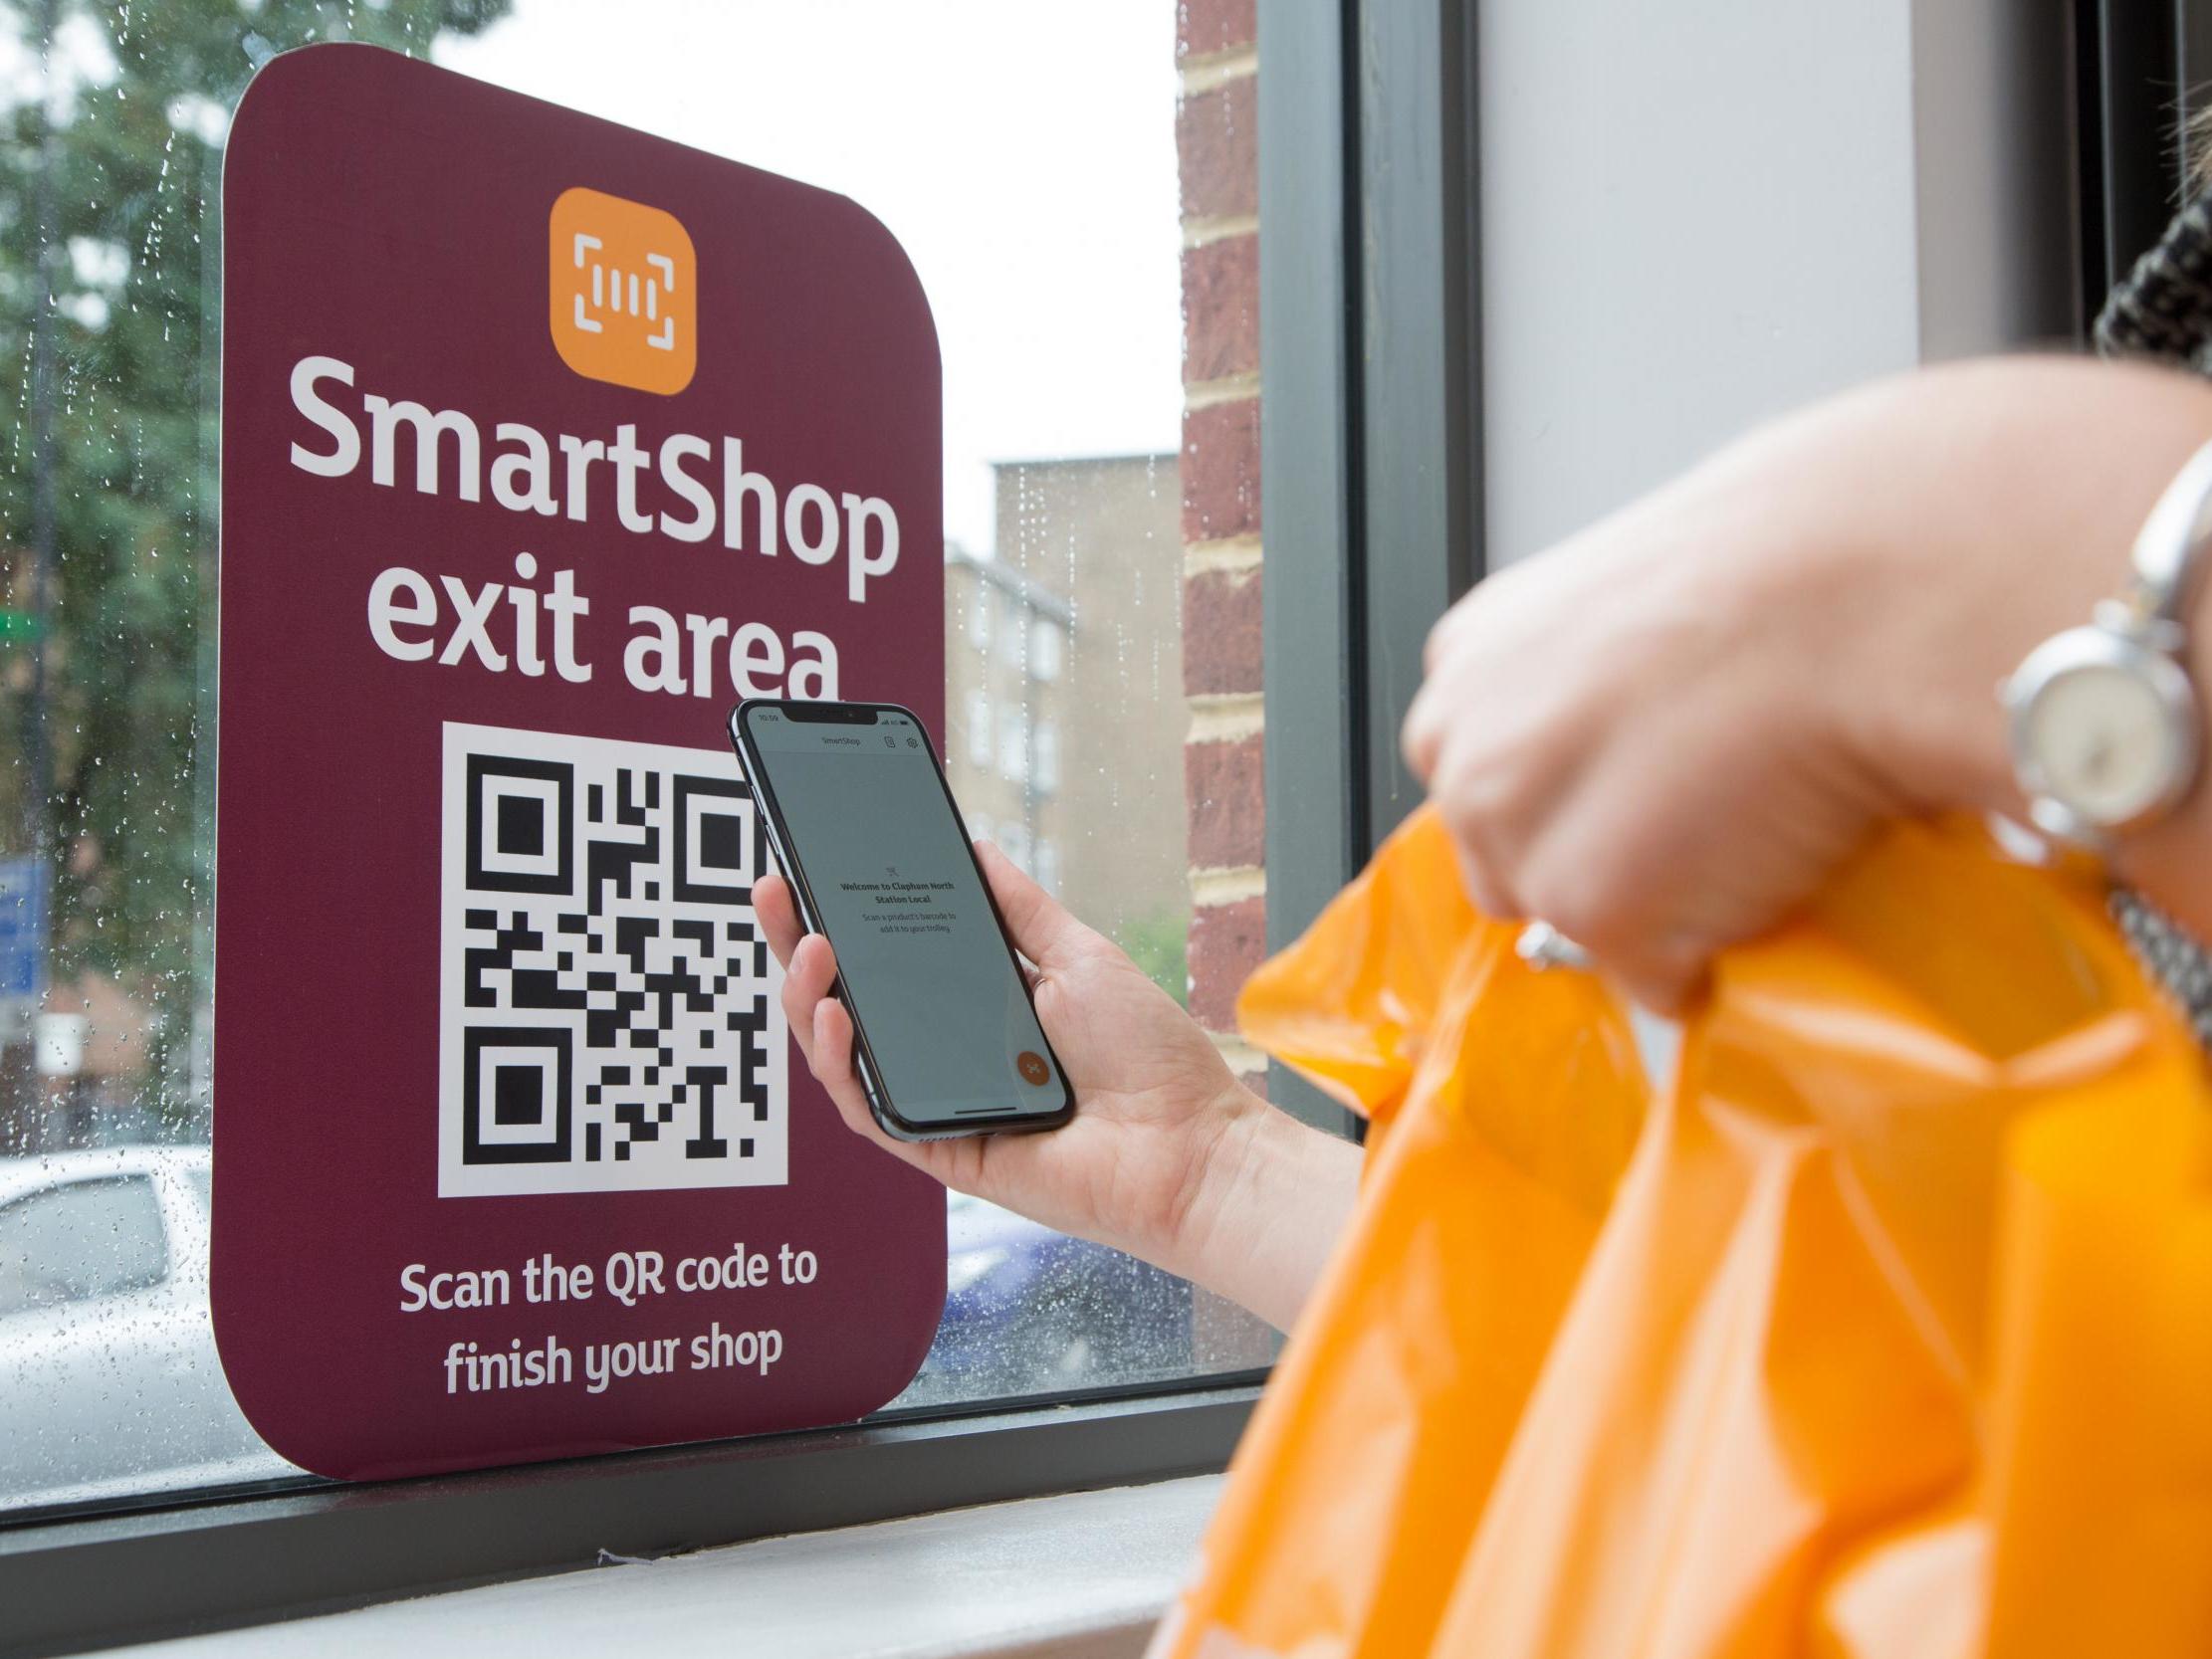 Starting this week, shoppers at Sainsbury’s in High Holborn simply scan their own items using an app and then walk out